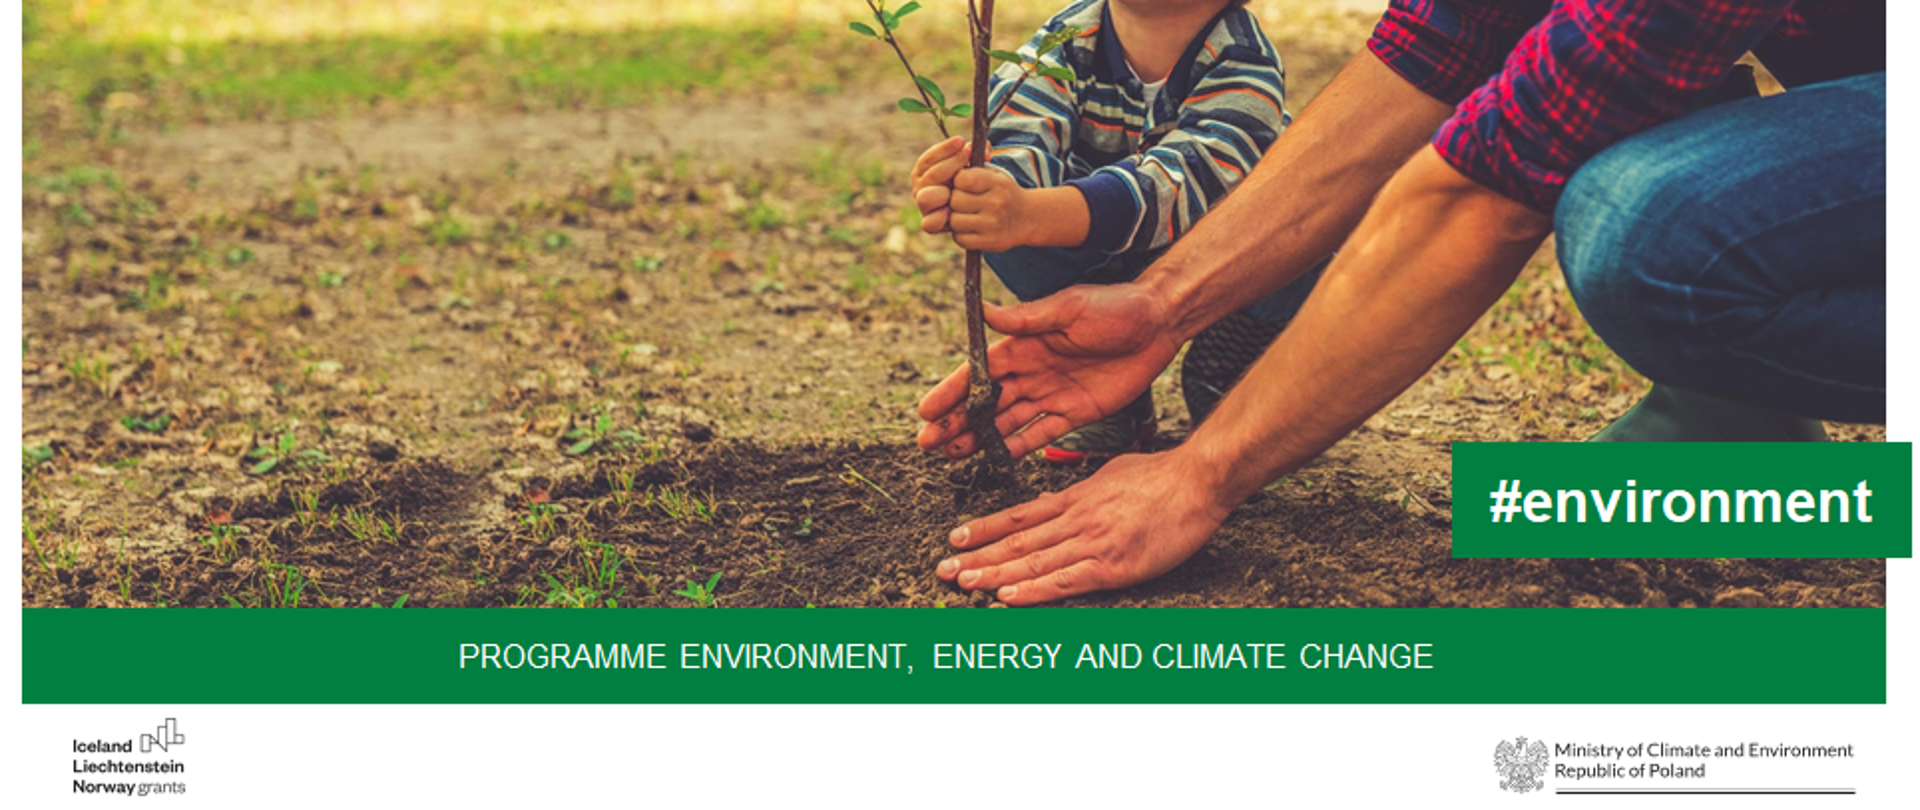 Environment, Energy and Climate Change Programme environment NGO's